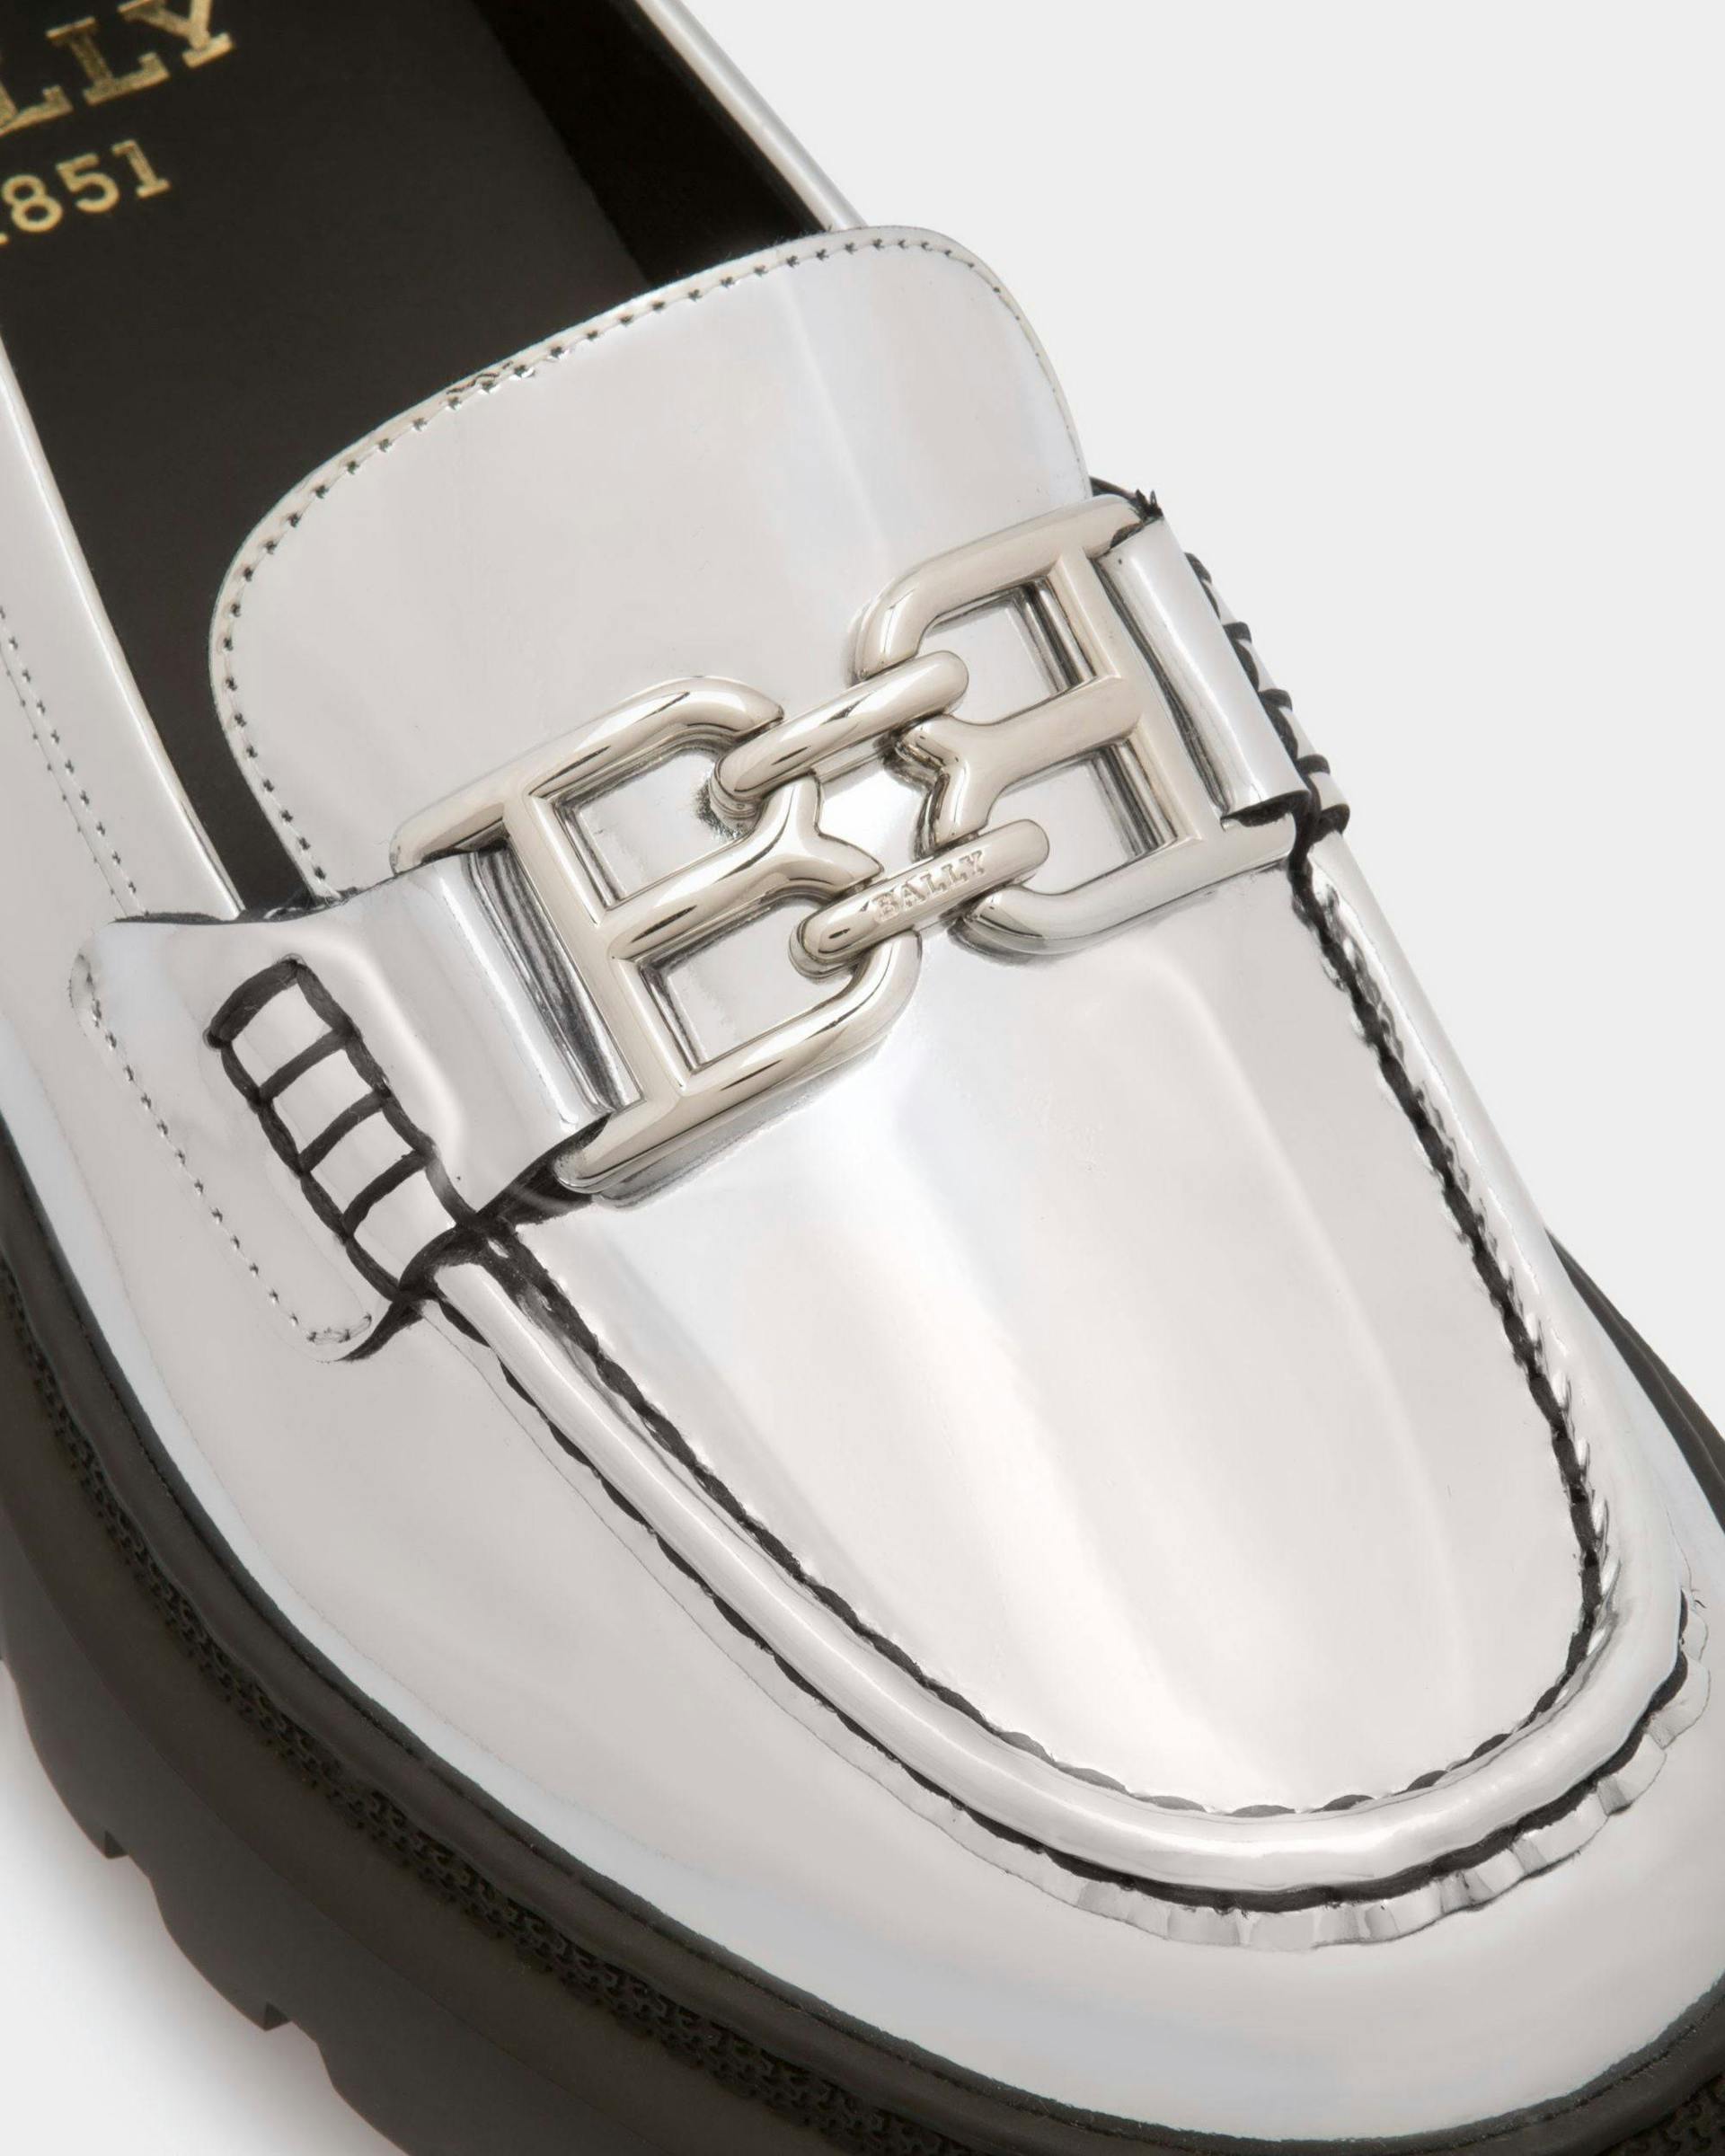 Gioia Flat Leather Moccasins In Silver - Women's - Bally - 03